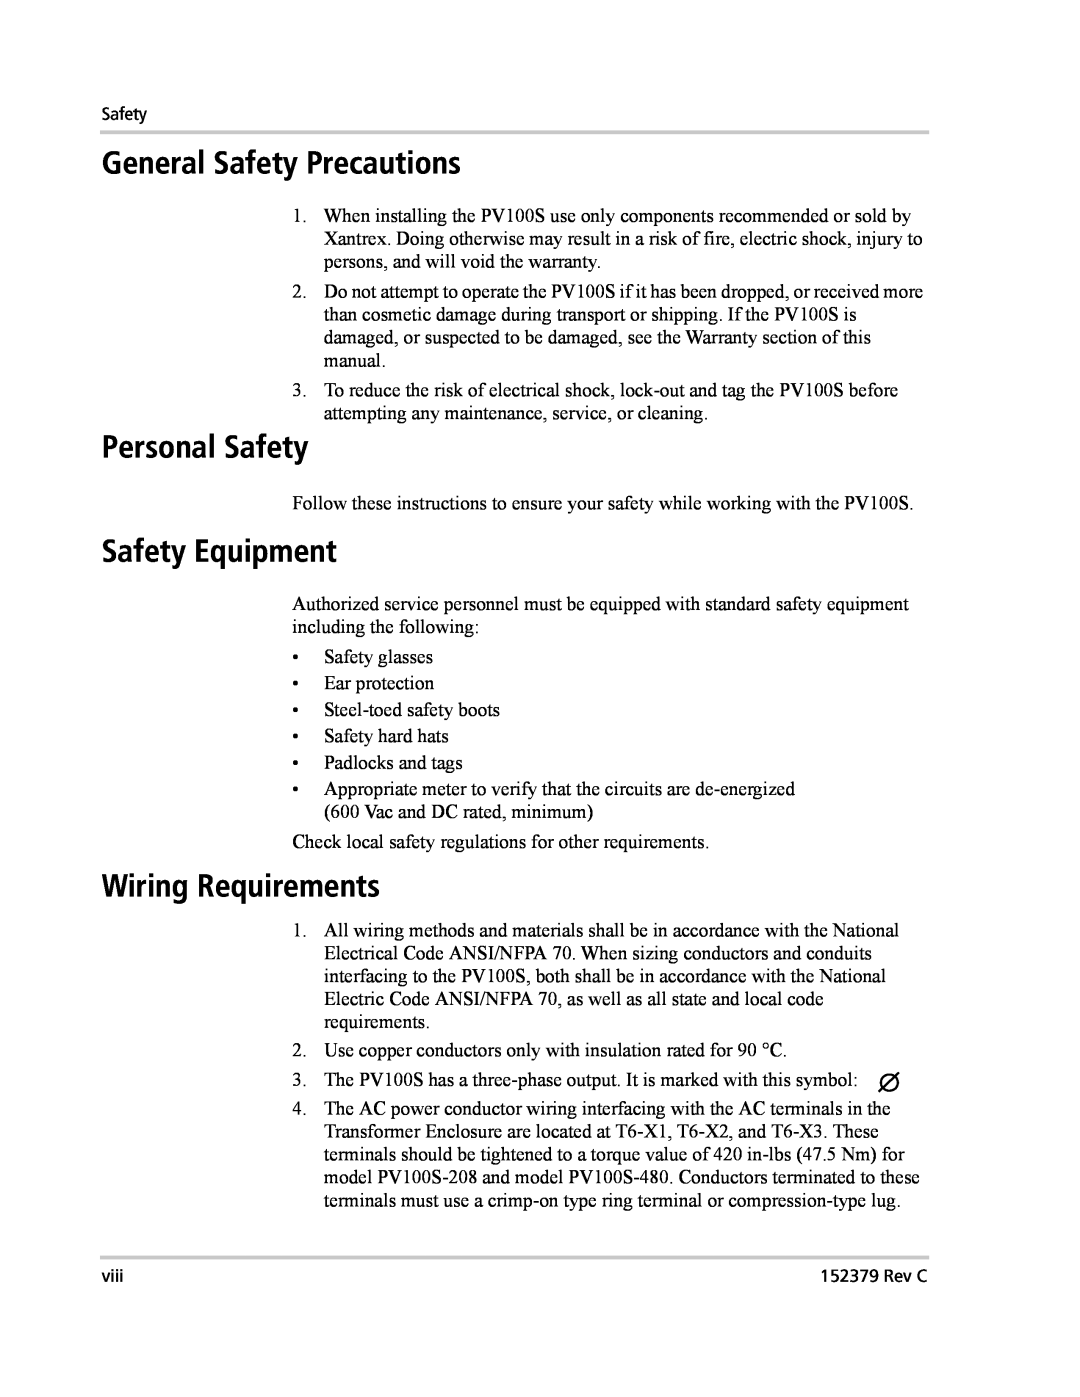 Xantrex Technology PV100S-208 manual General Safety Precautions, Personal Safety, Safety Equipment, Wiring Requirements 